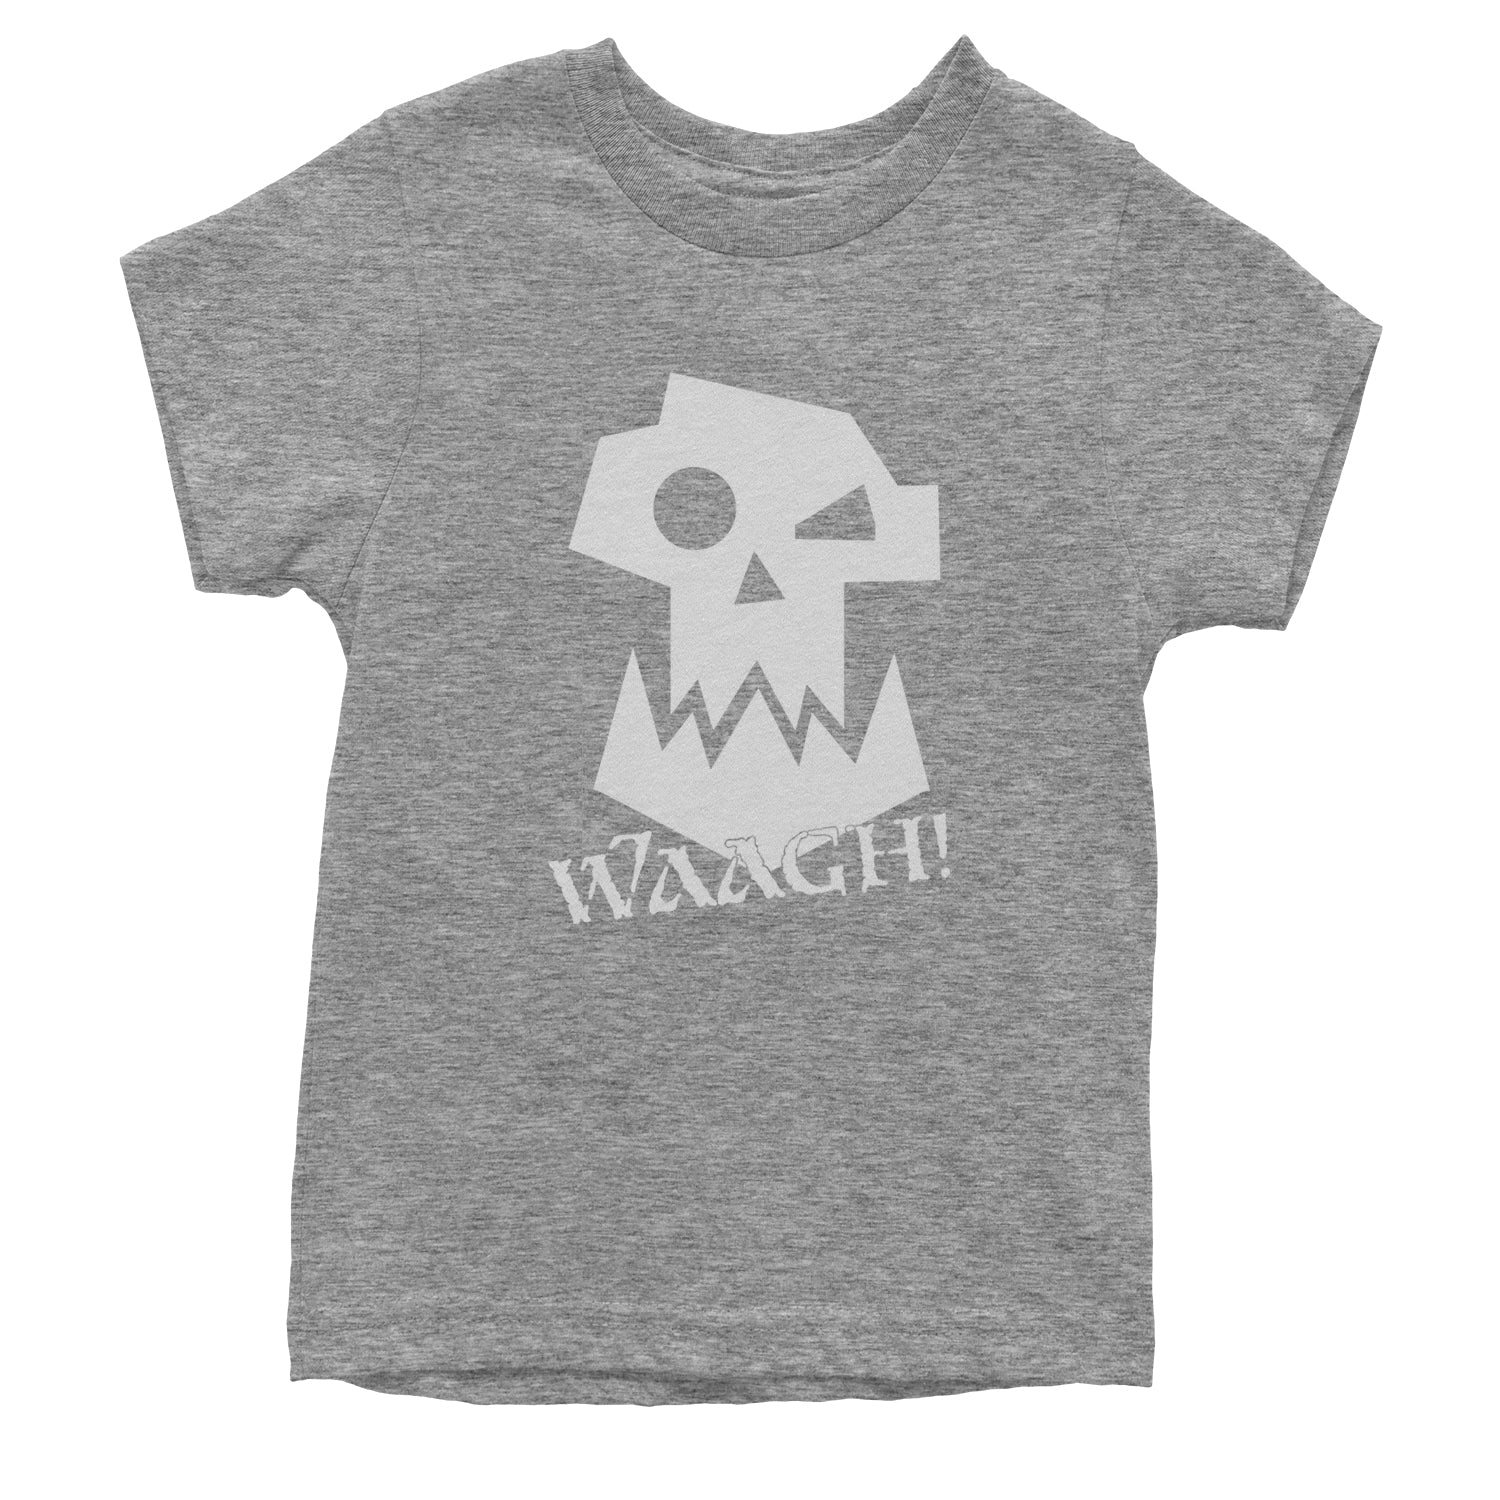 Ork Miniature Tabletop Wargaming Waagh Youth T-shirt #expressiontees by Expression Tees